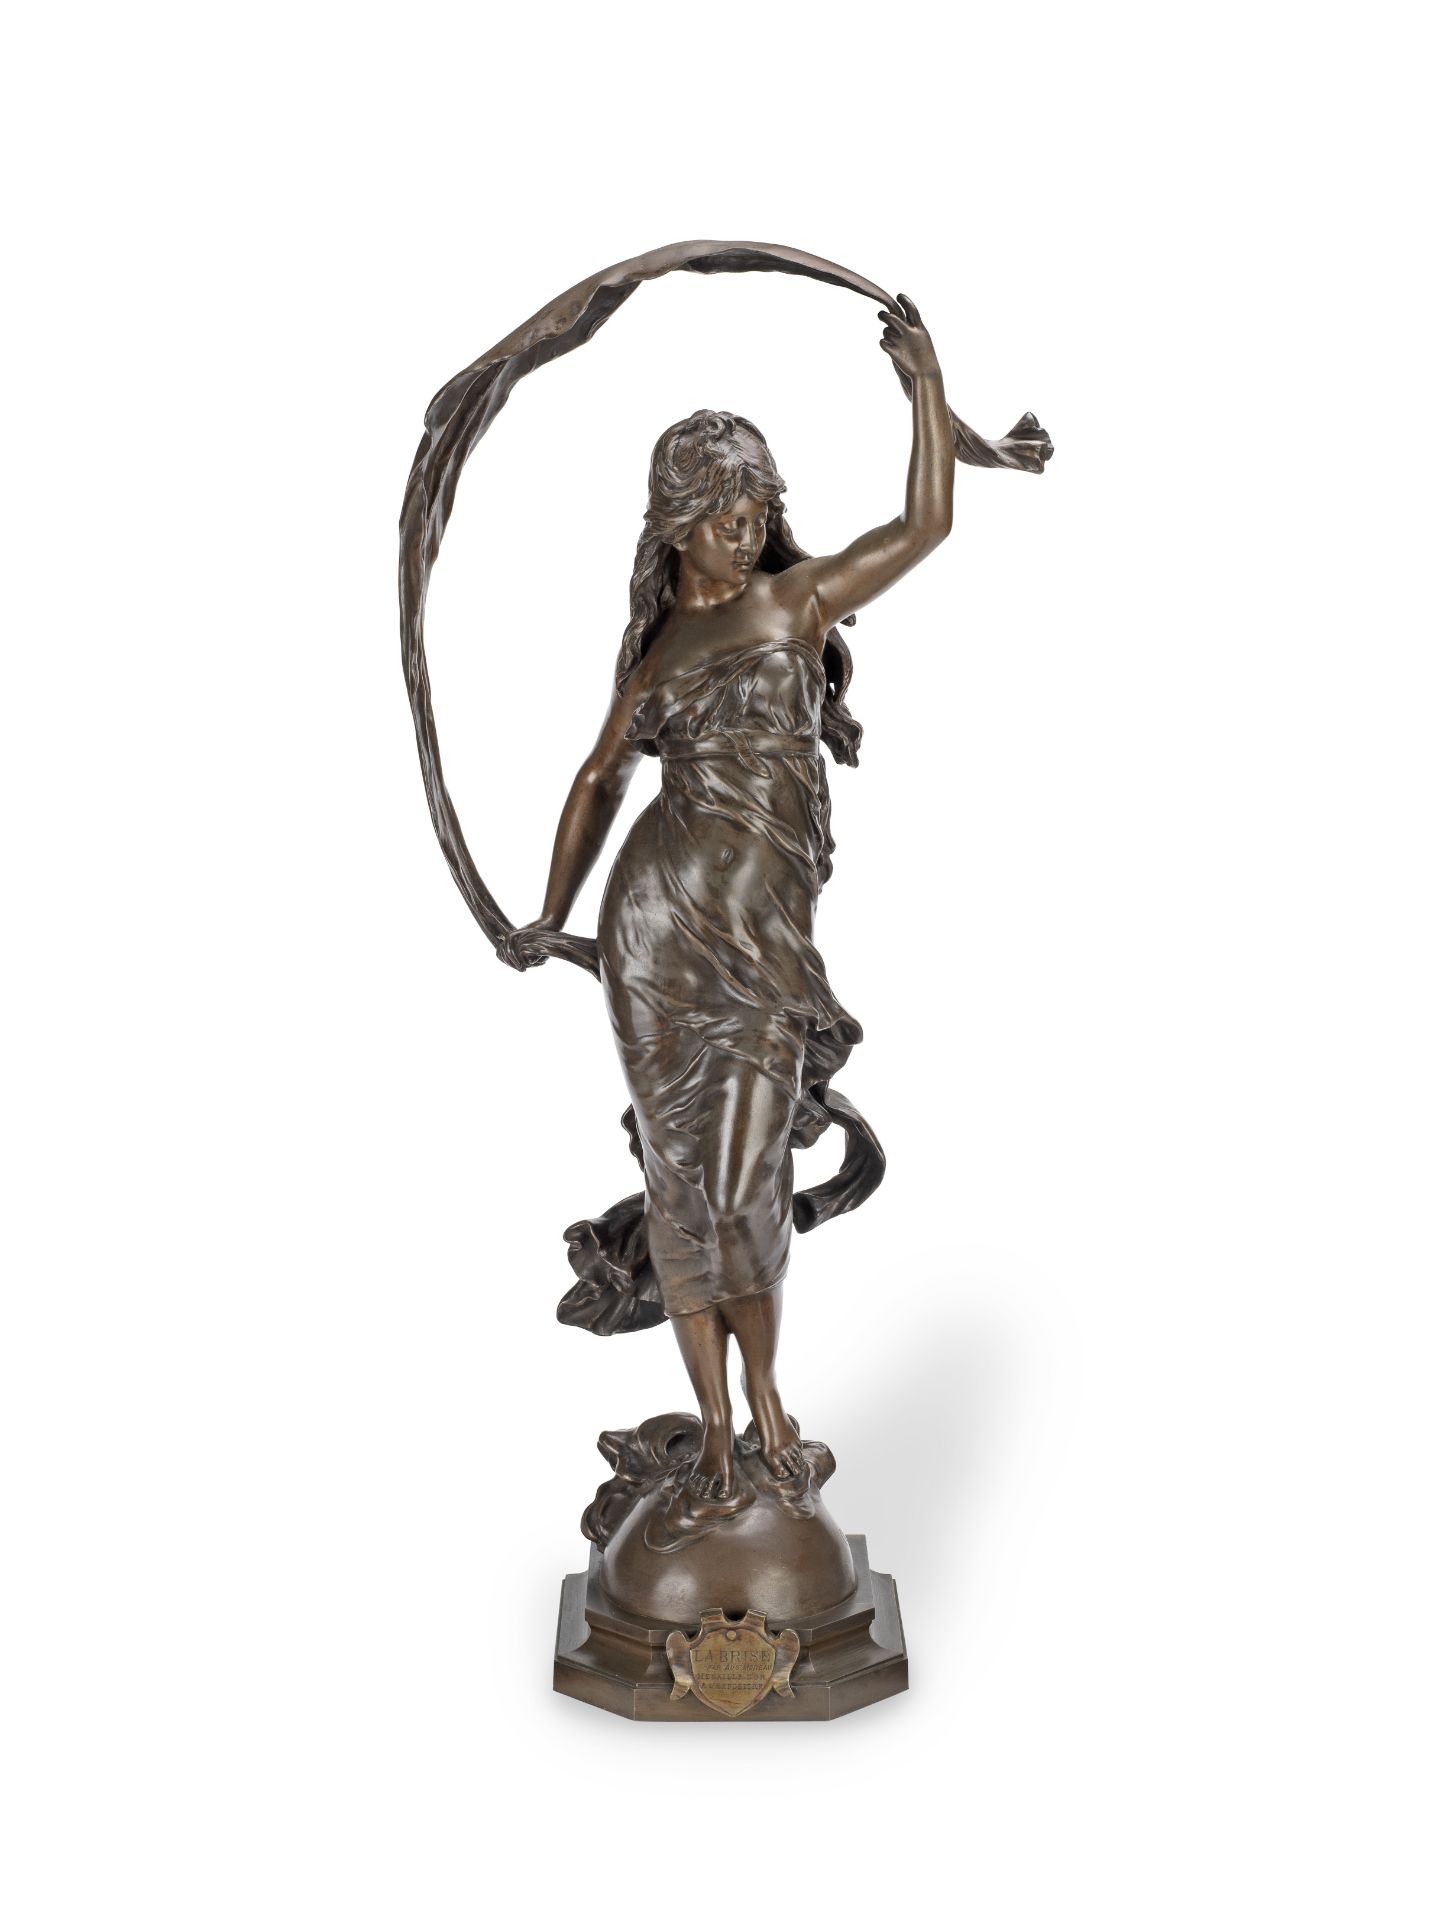 August Moreau (French, 1834-1917): A patinated bronze figure of 'La Brise'